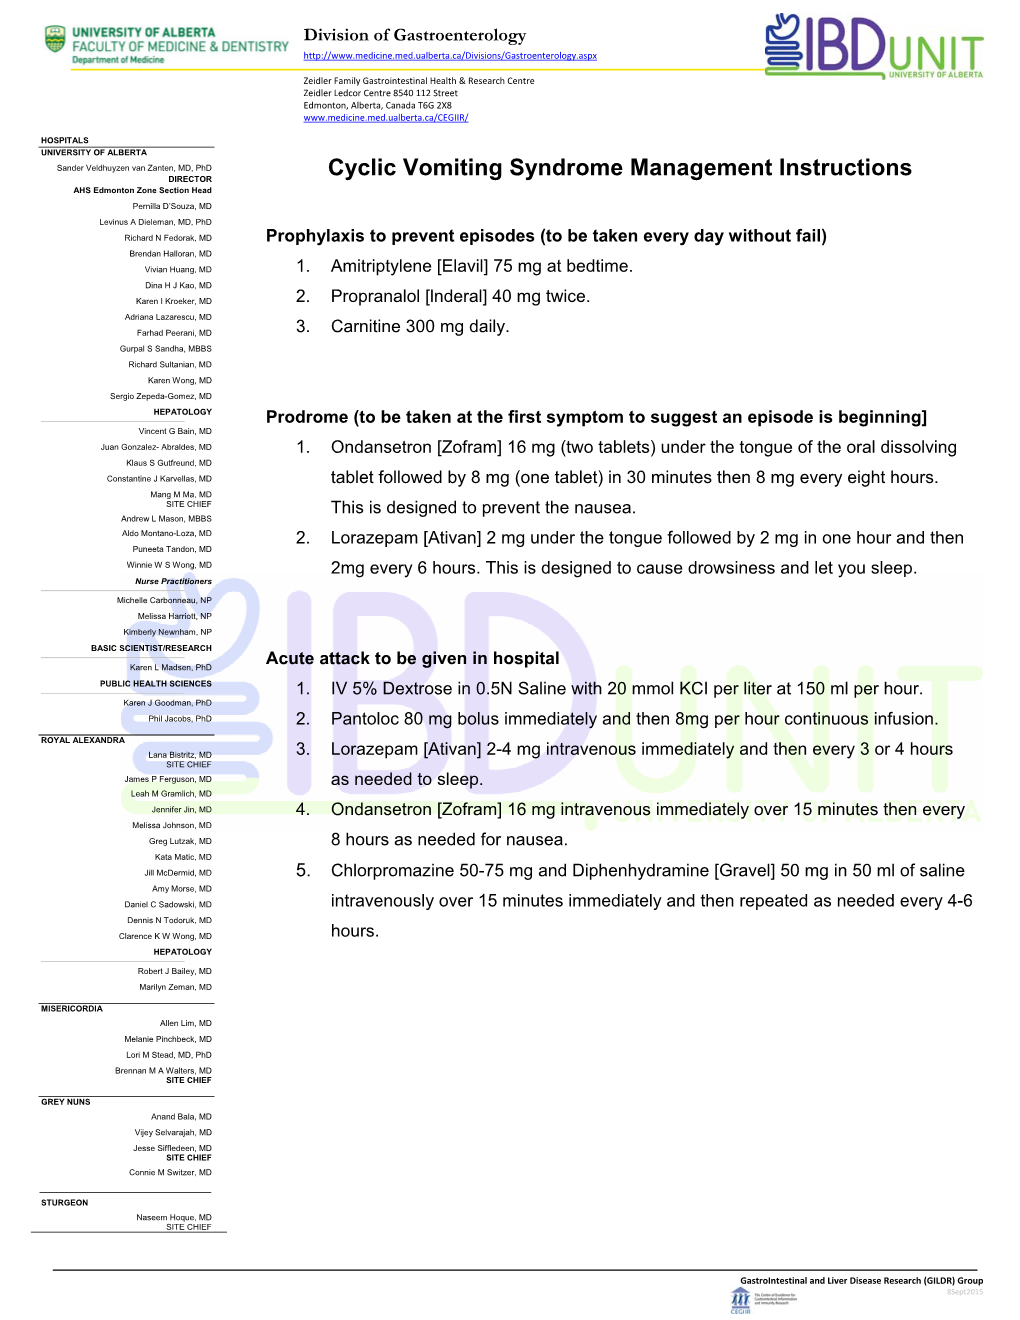 Cyclic Vomiting Syndrome Management Instructions